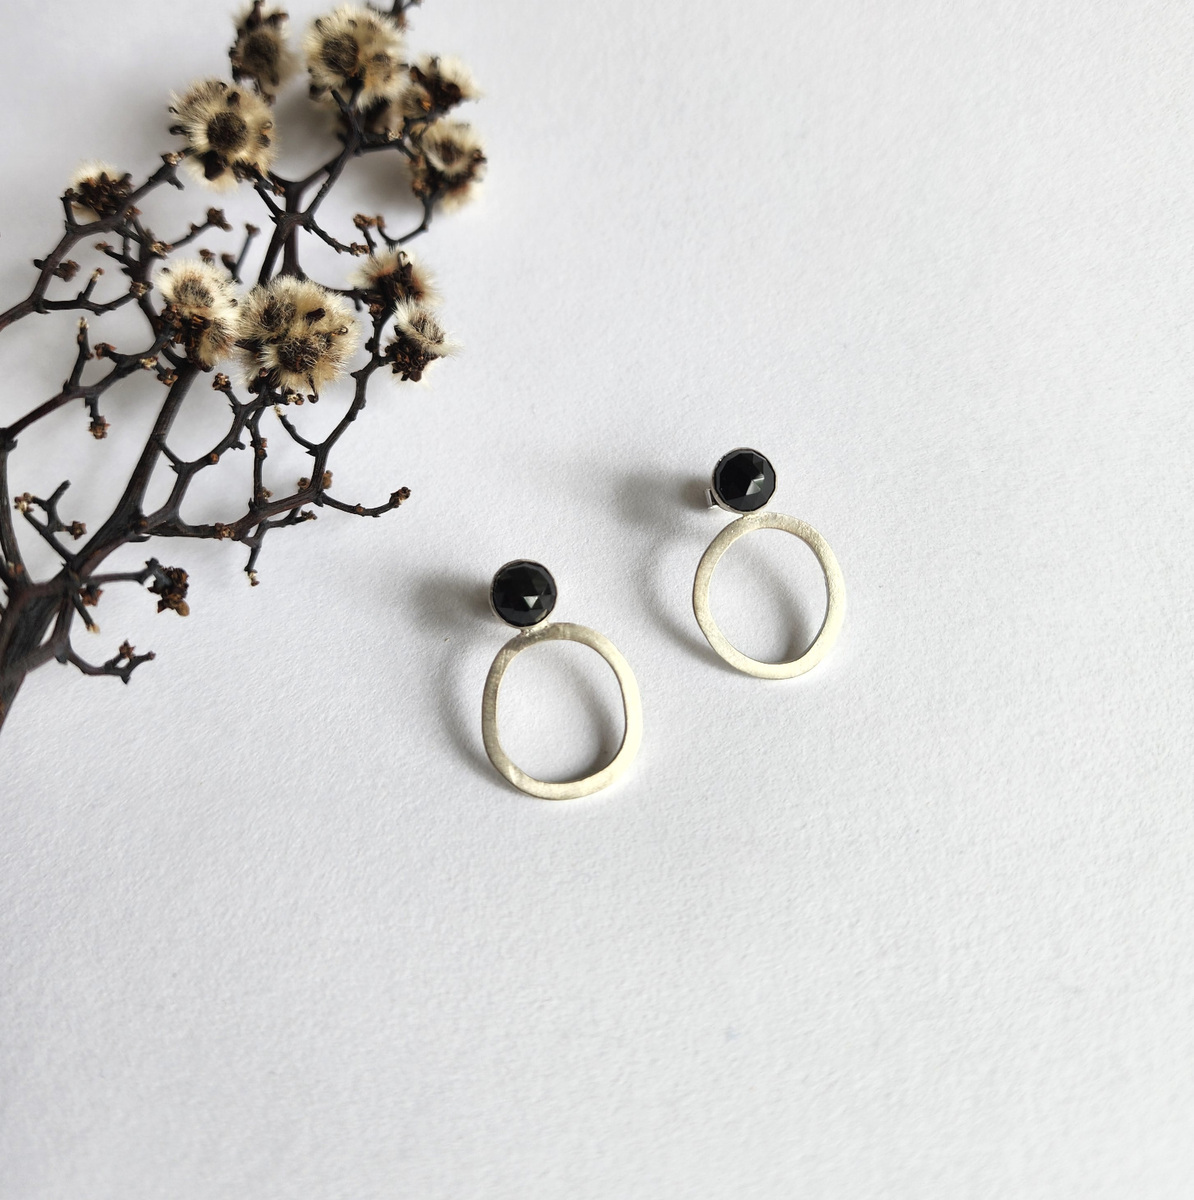 Gemstone Cycle studs with Black Spinel